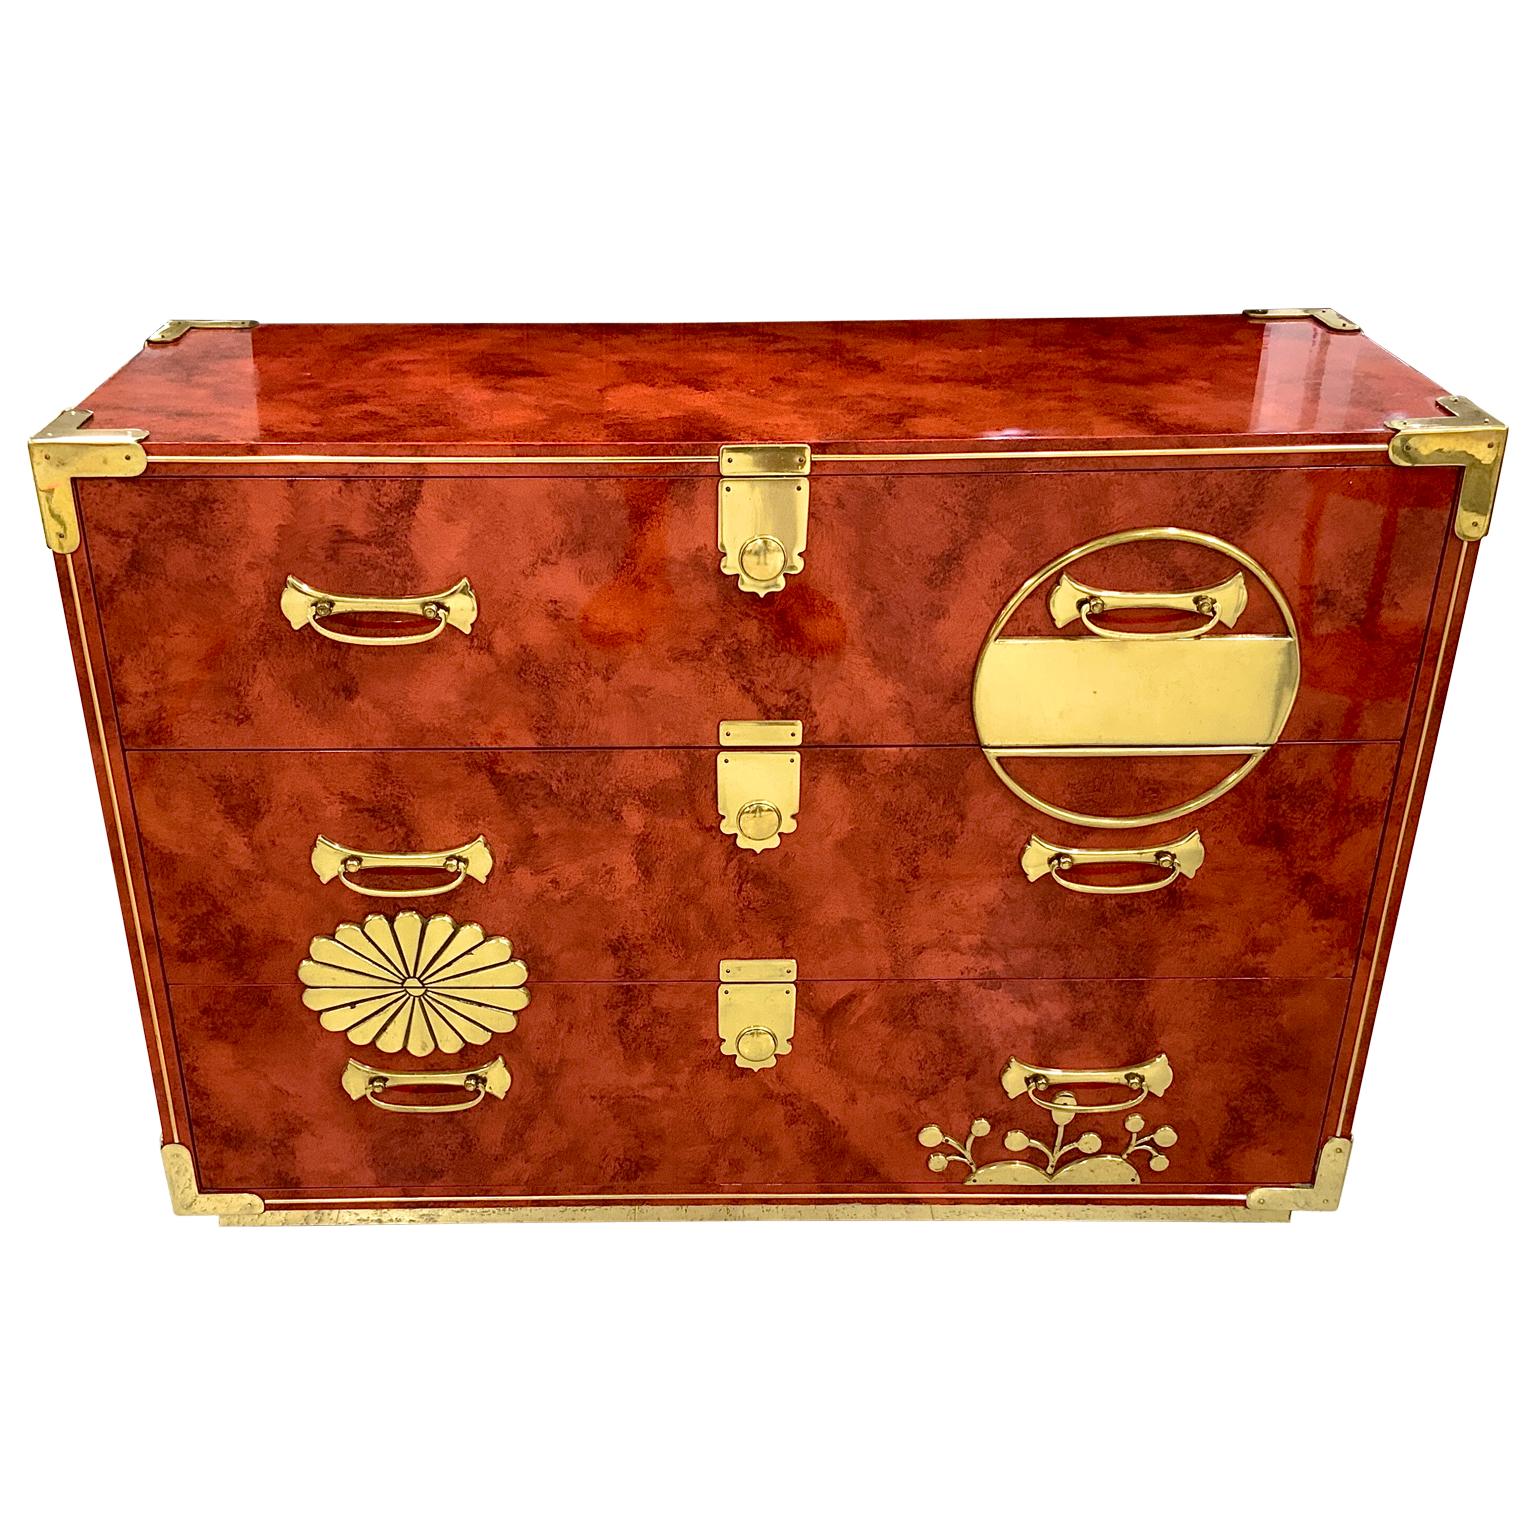 A exceptional Mastercraft Asian Mid-Century Modern brass chest. Wonderful solid brass hardware corner plates etc. the chest has a gorgeous hand faux lacquered original paint in a fabulous persimmon color. 